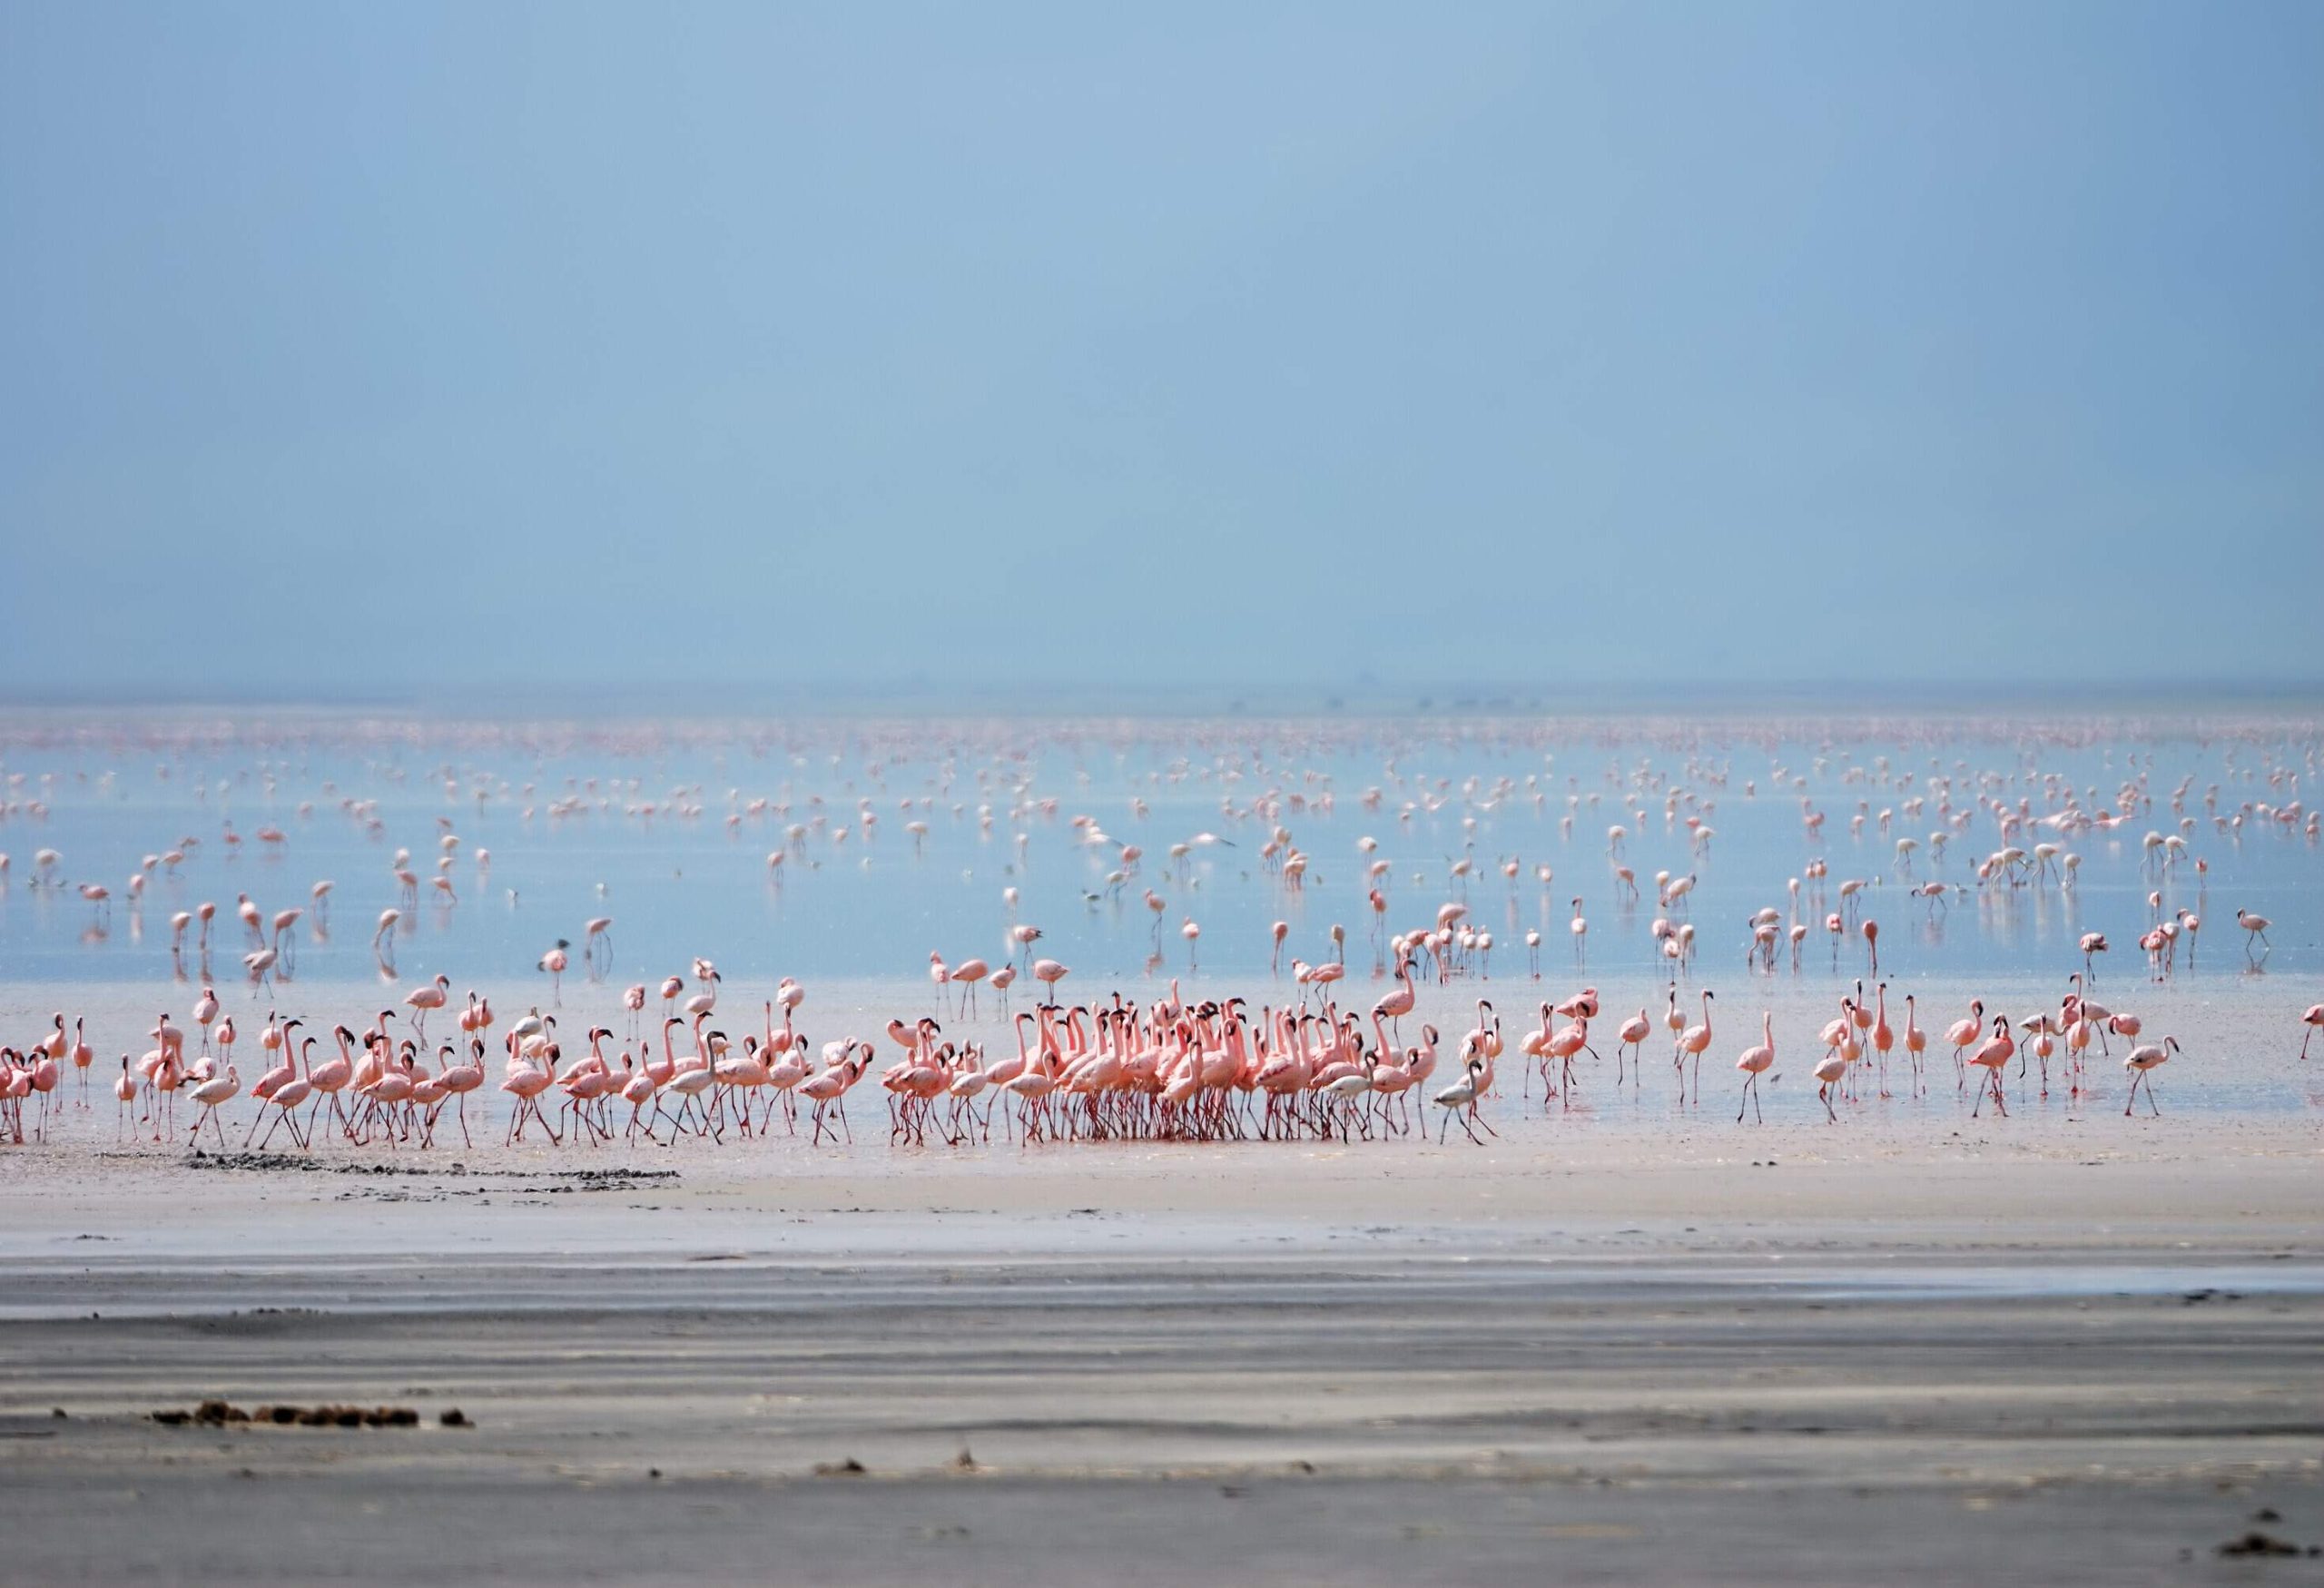 A flamboyance of flamingos wandering on a lake's shallow waters.